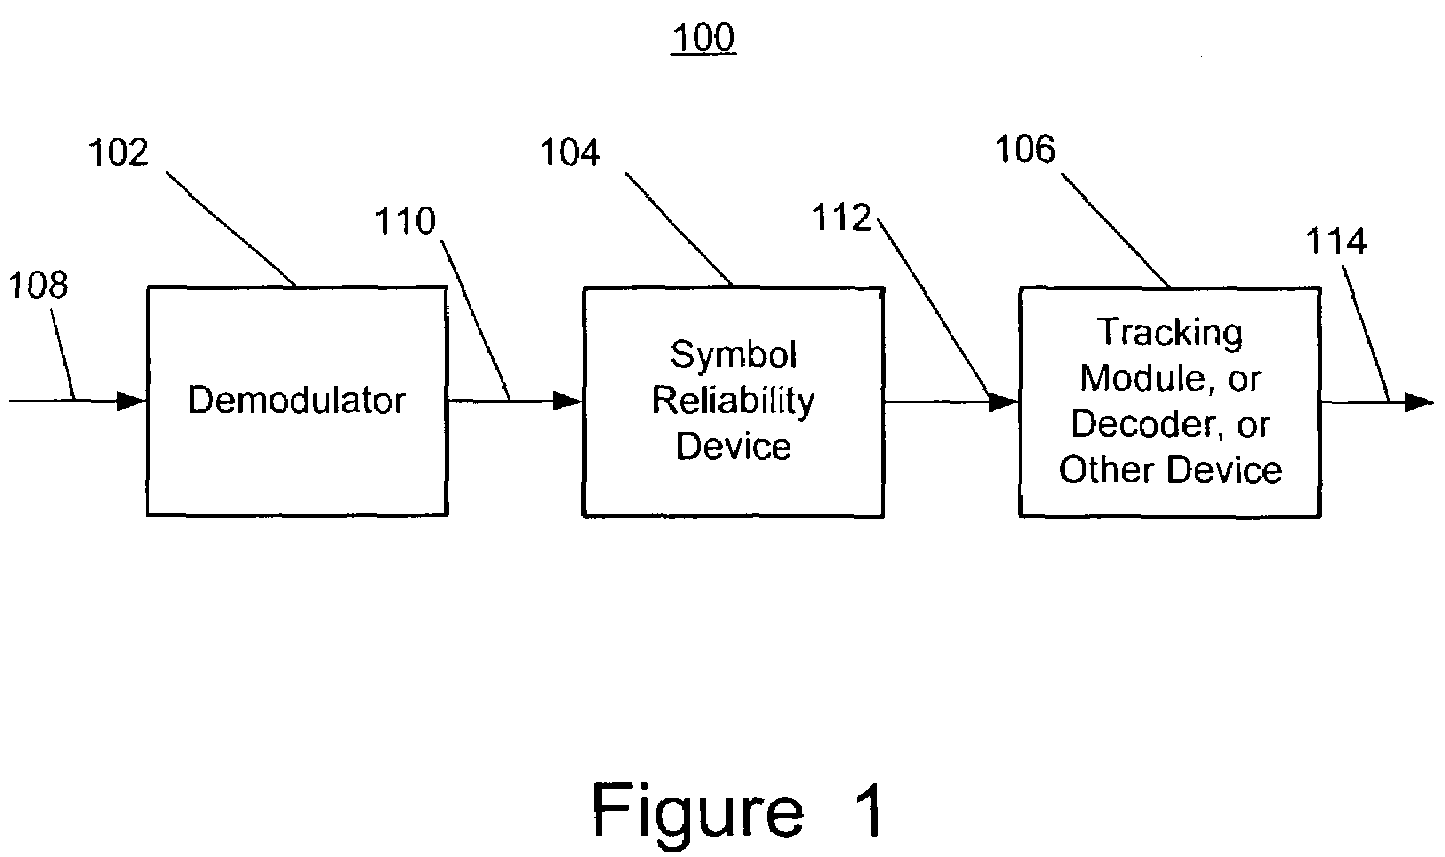 Symbol reliability determination and symbol pre-selection based on reliability criteria